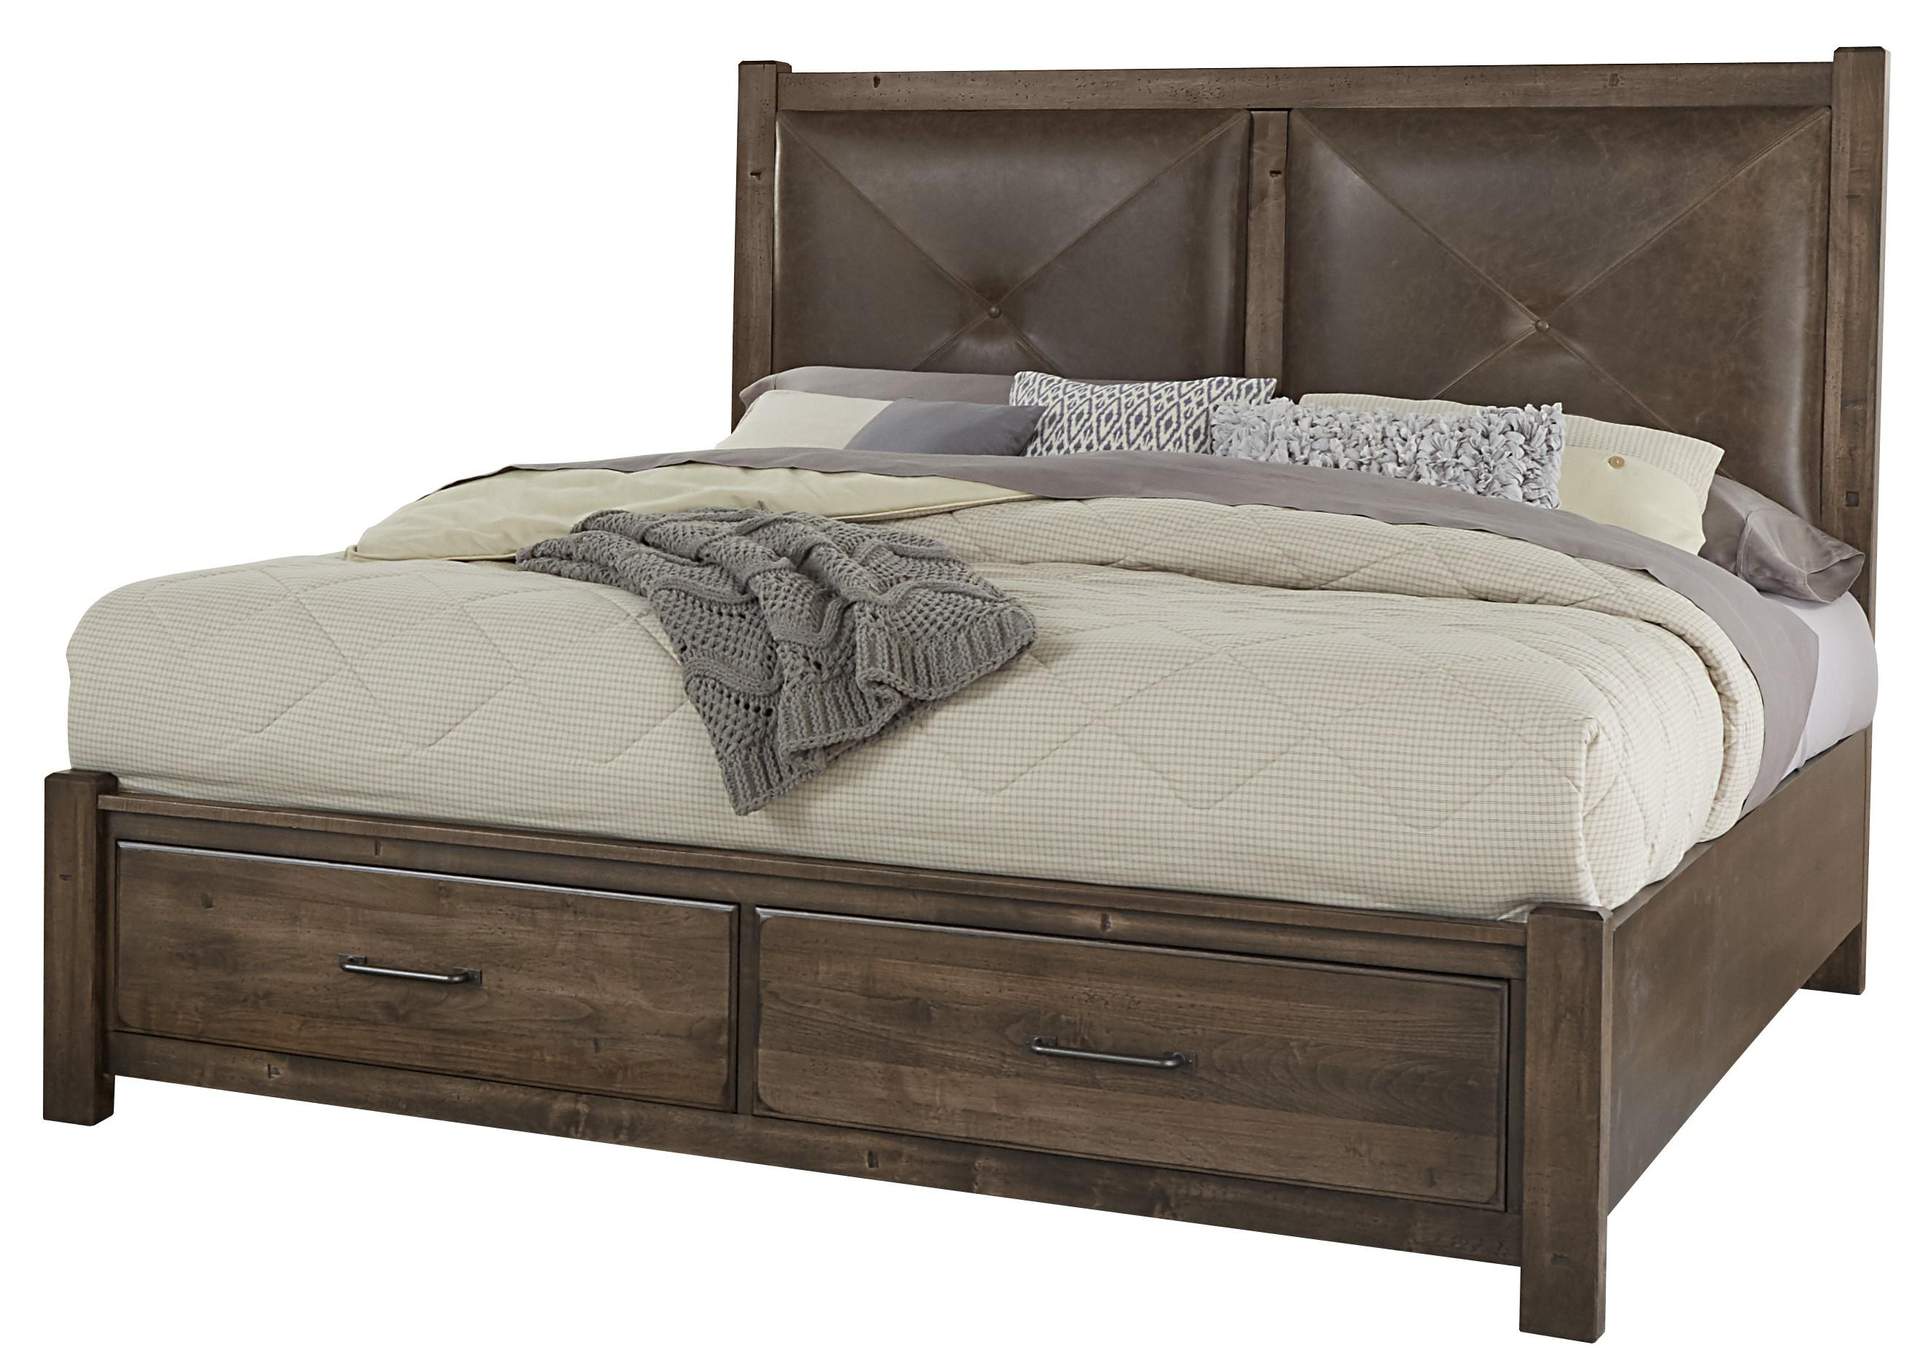 Cool Rustic Mondo Leather Queen Bed w/2 Drawer Storage,Vaughan-Bassett